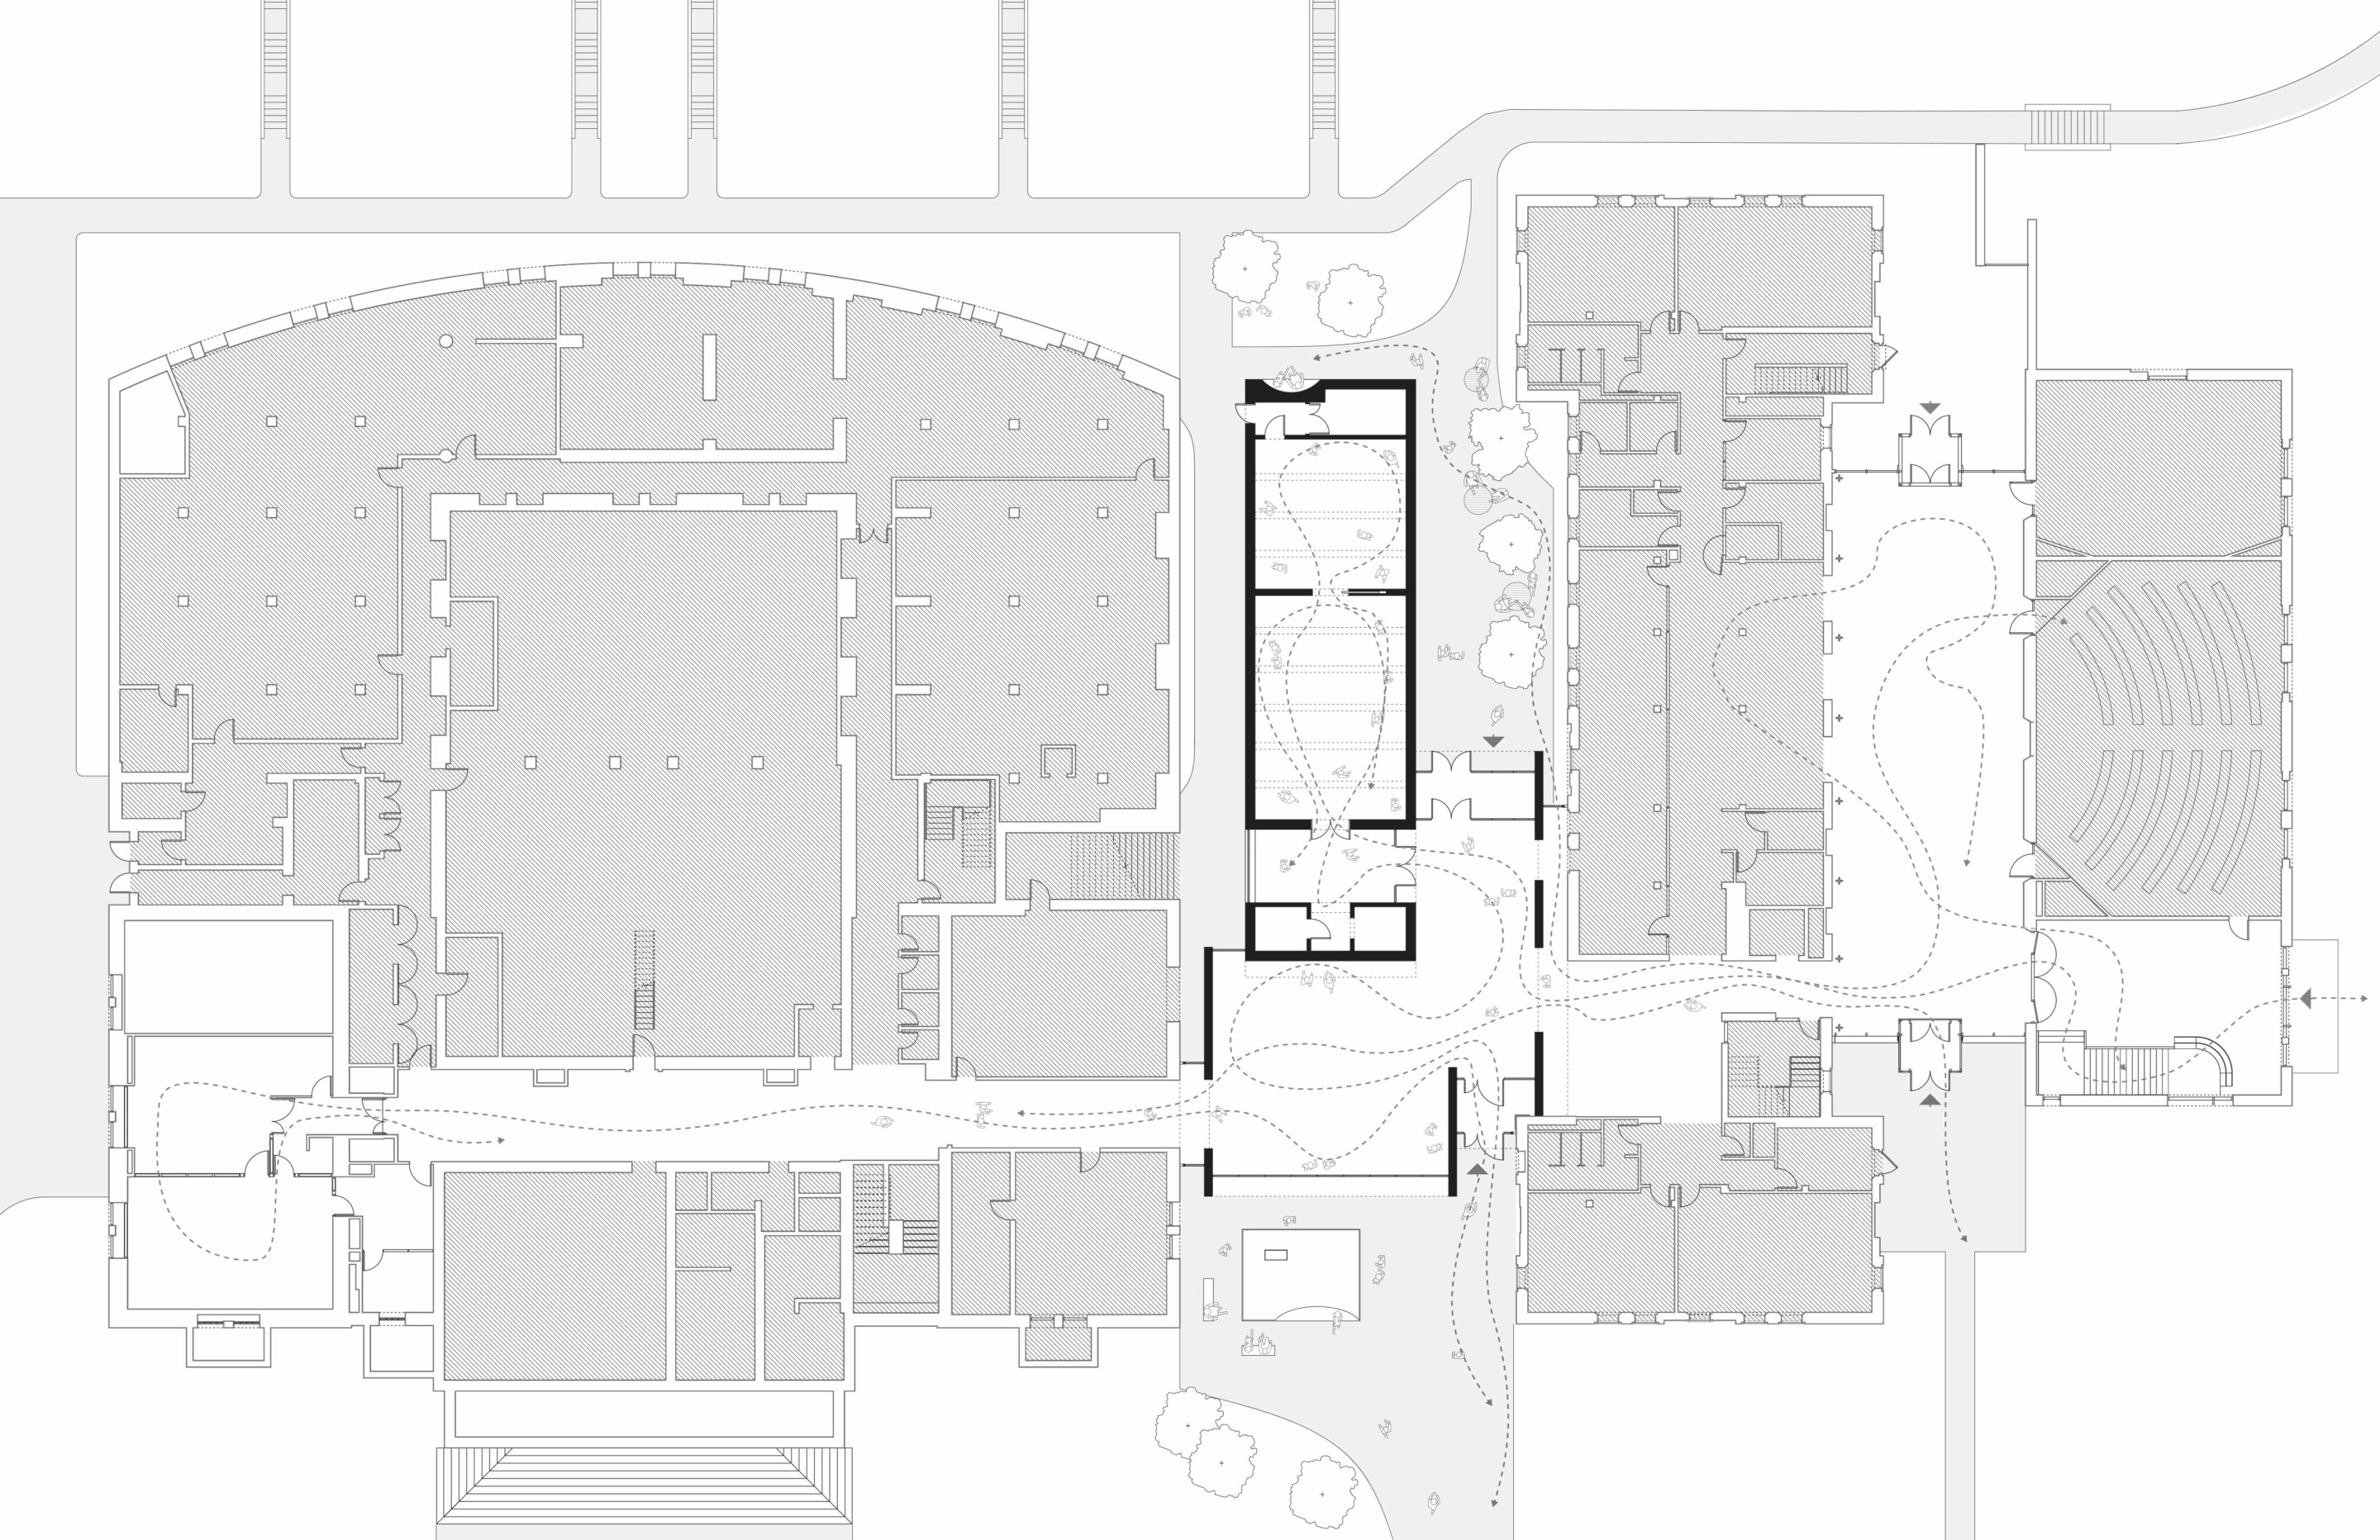 Aerial site plan of the Wesleyan campus showing a narrow gallery building between two others